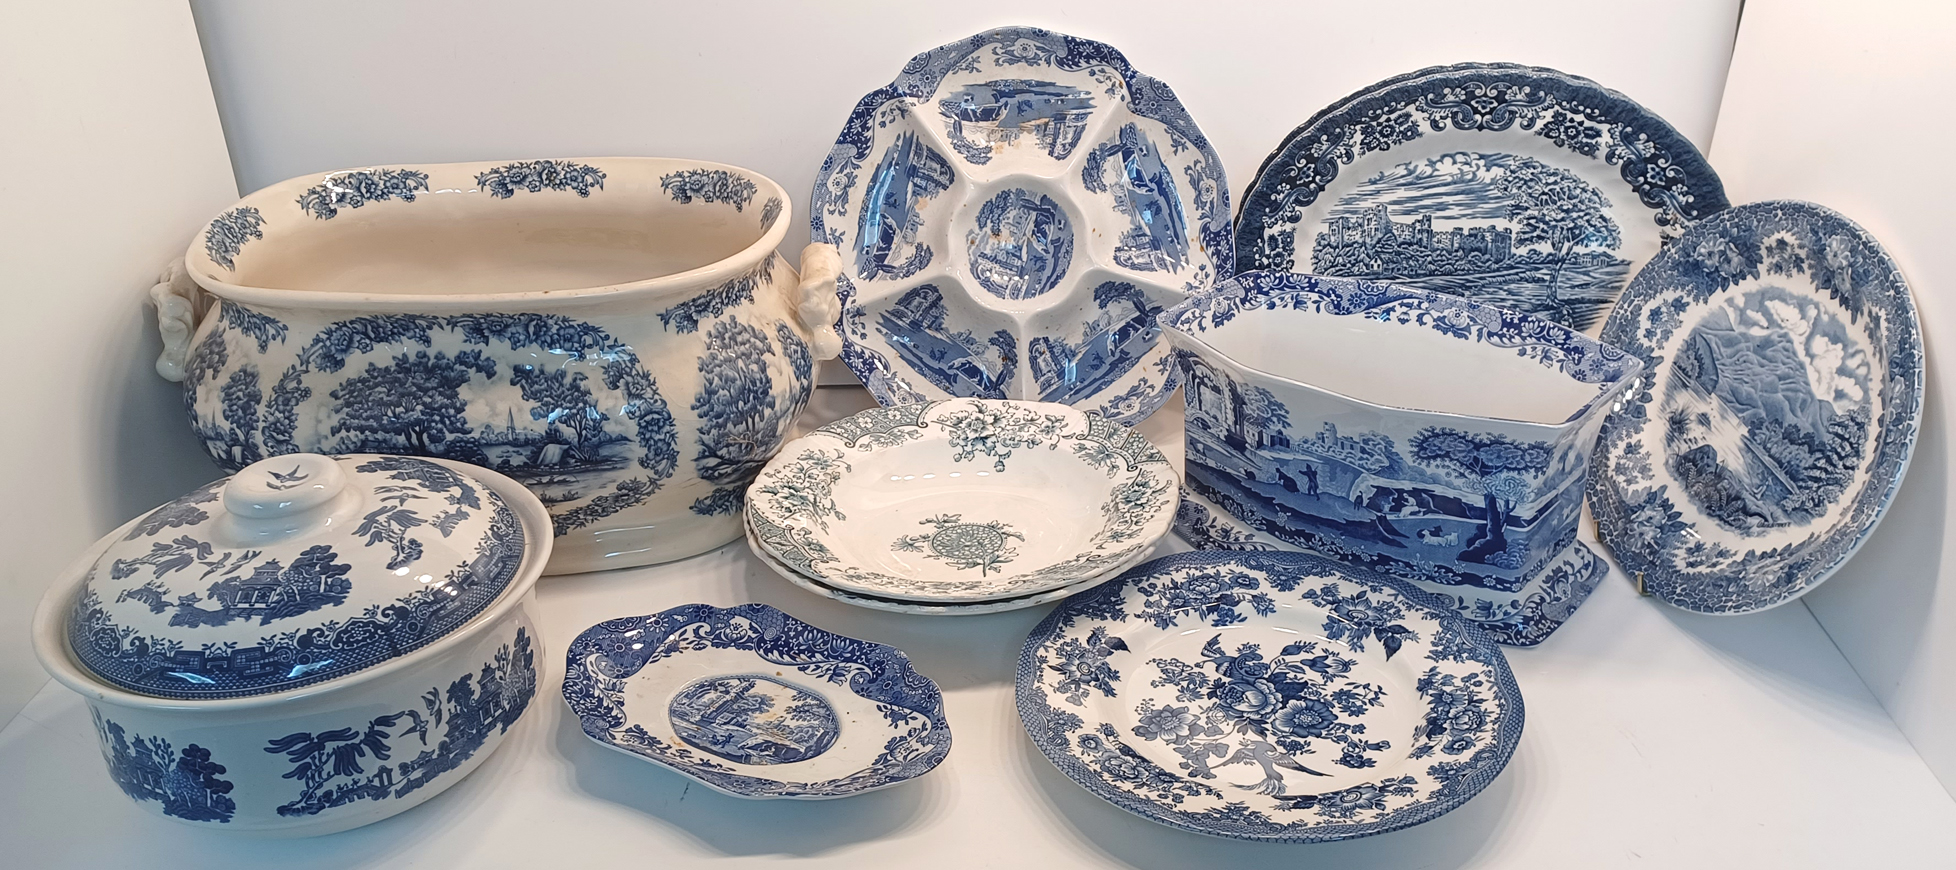 BLUE AND WHITE CHINA INC. SPODE ITALIAN, WILLOW PATTERN, MYOTT MEAKIN, IRONSTONE CACHEPOT FOOT BATH  - Image 2 of 3